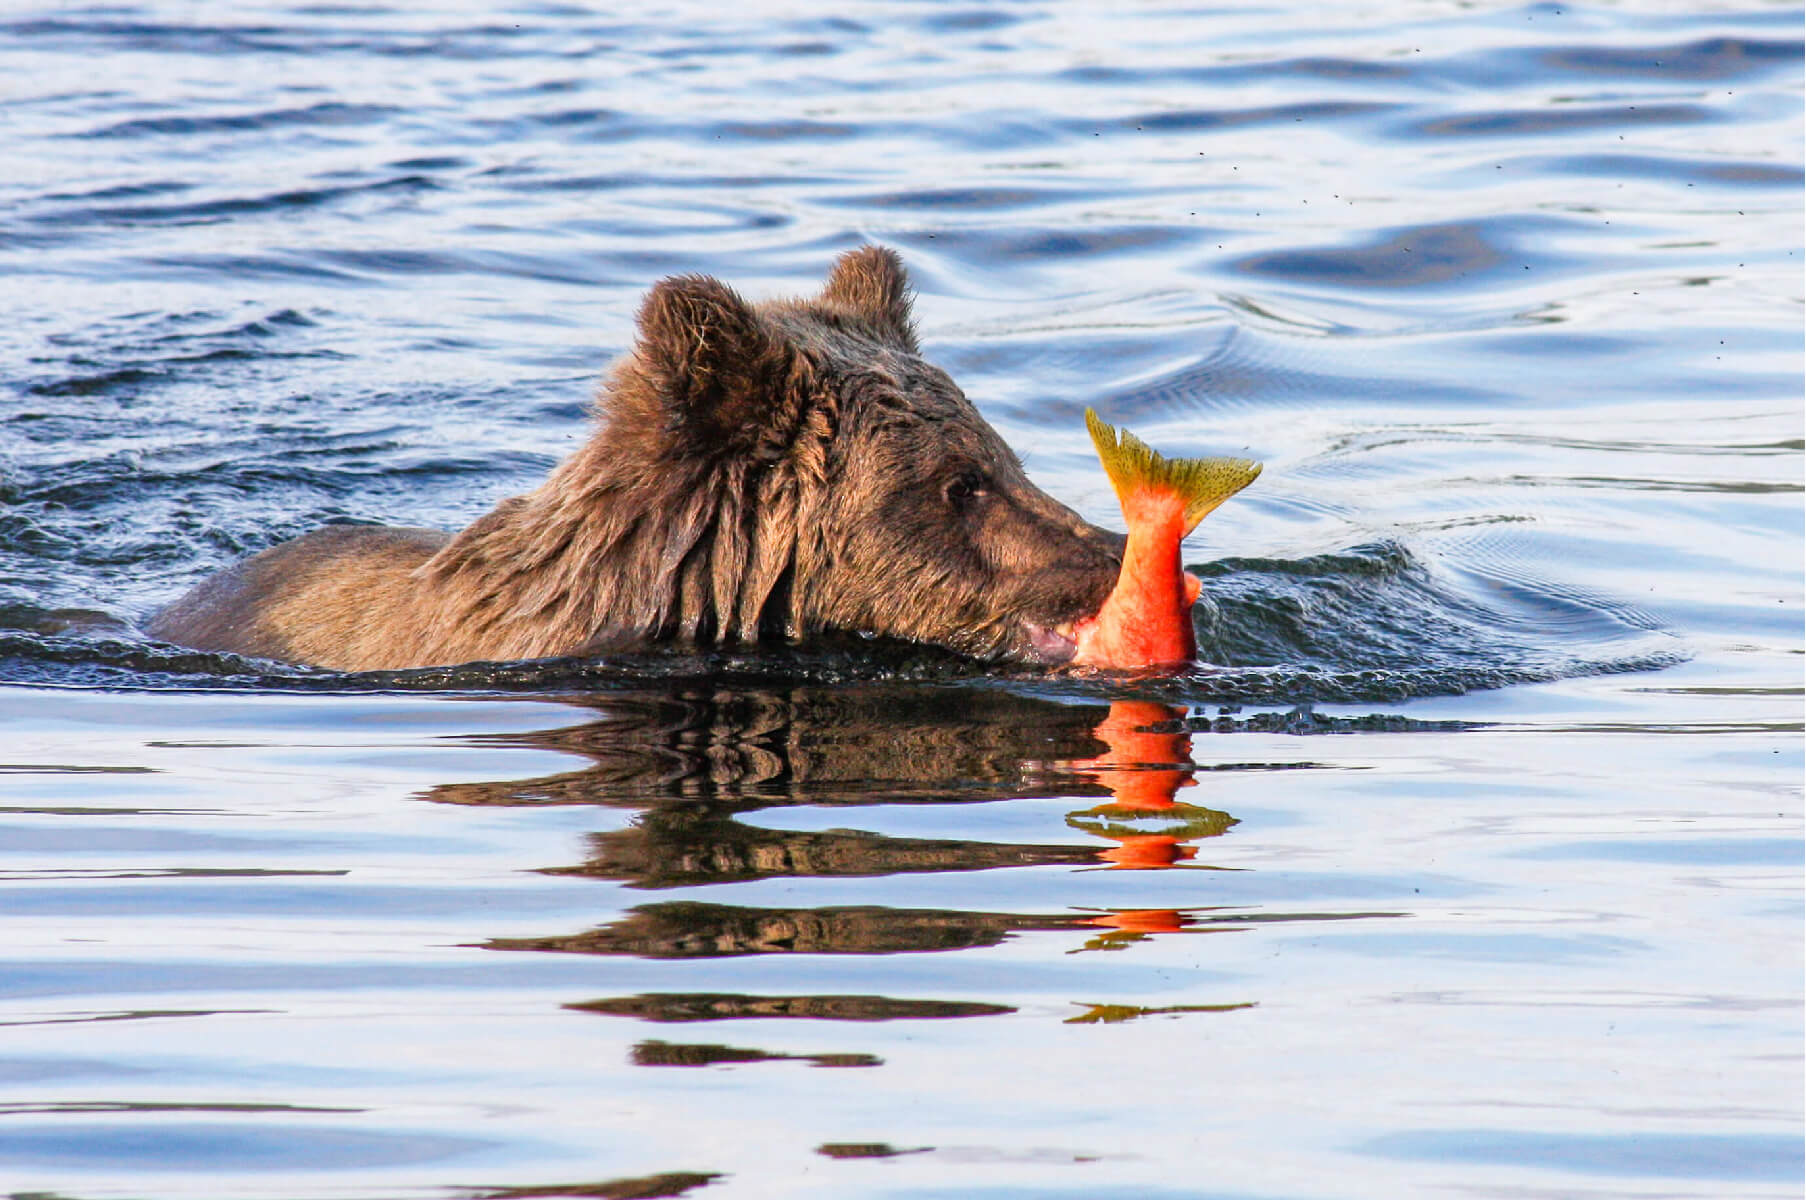 A bear swimming through gently rippling water with a bright orange salmon in its mouth